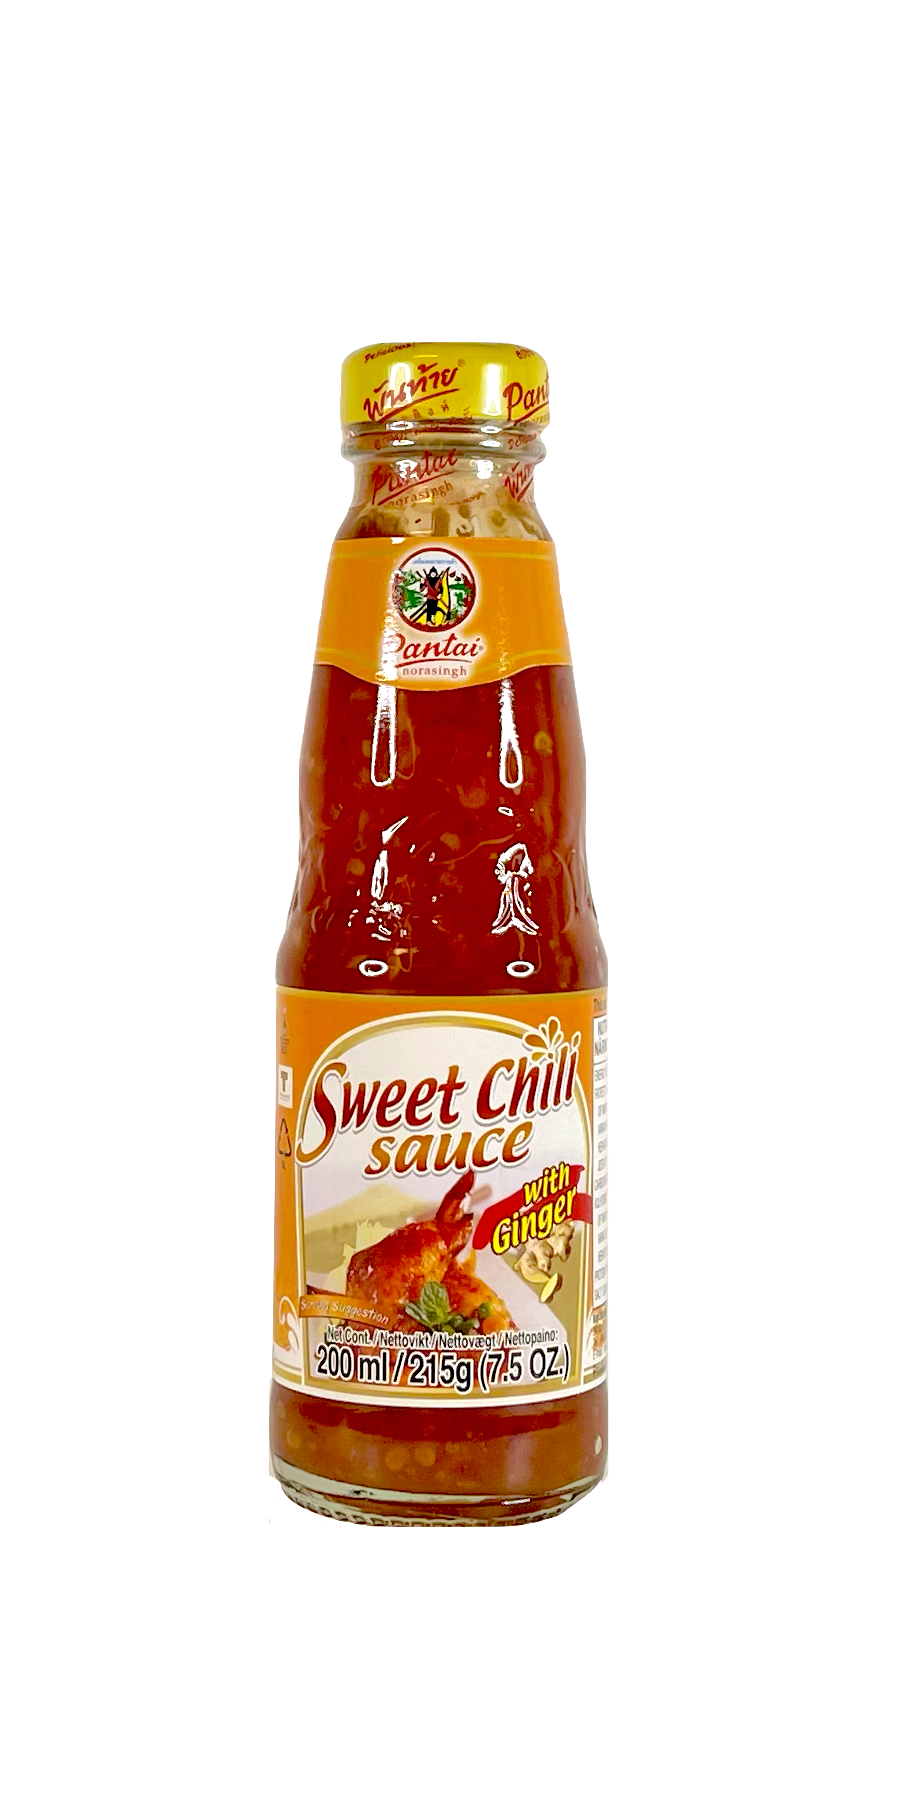 Sweet Chili Sauce With Ginger Flavour 200ml Pantainorasingh Thailand